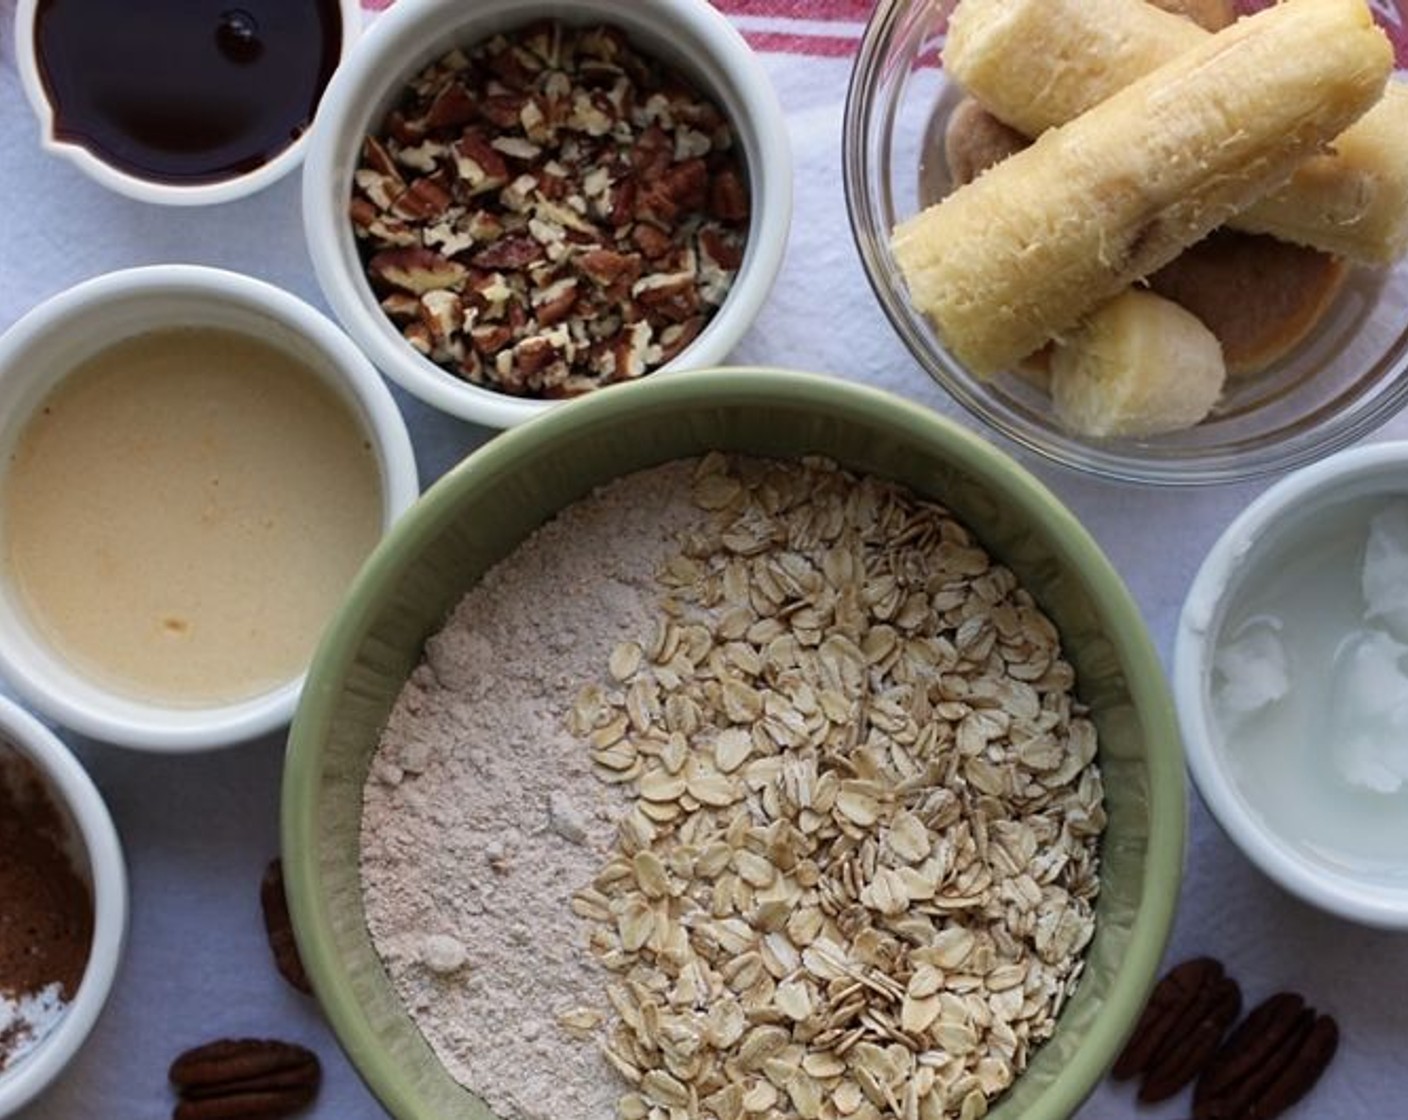 step 2 Mix together Whole Wheat Flour (1 1/2 cups), Old Fashioned Rolled Oats (1/2 cup), Baking Powder (1/2 Tbsp), Ground Cinnamon (1/2 tsp), Ground Nutmeg (1/2 tsp),  Salt (1 dash) and Chopped Pecans (1/4 cup) in a mixing bowl.